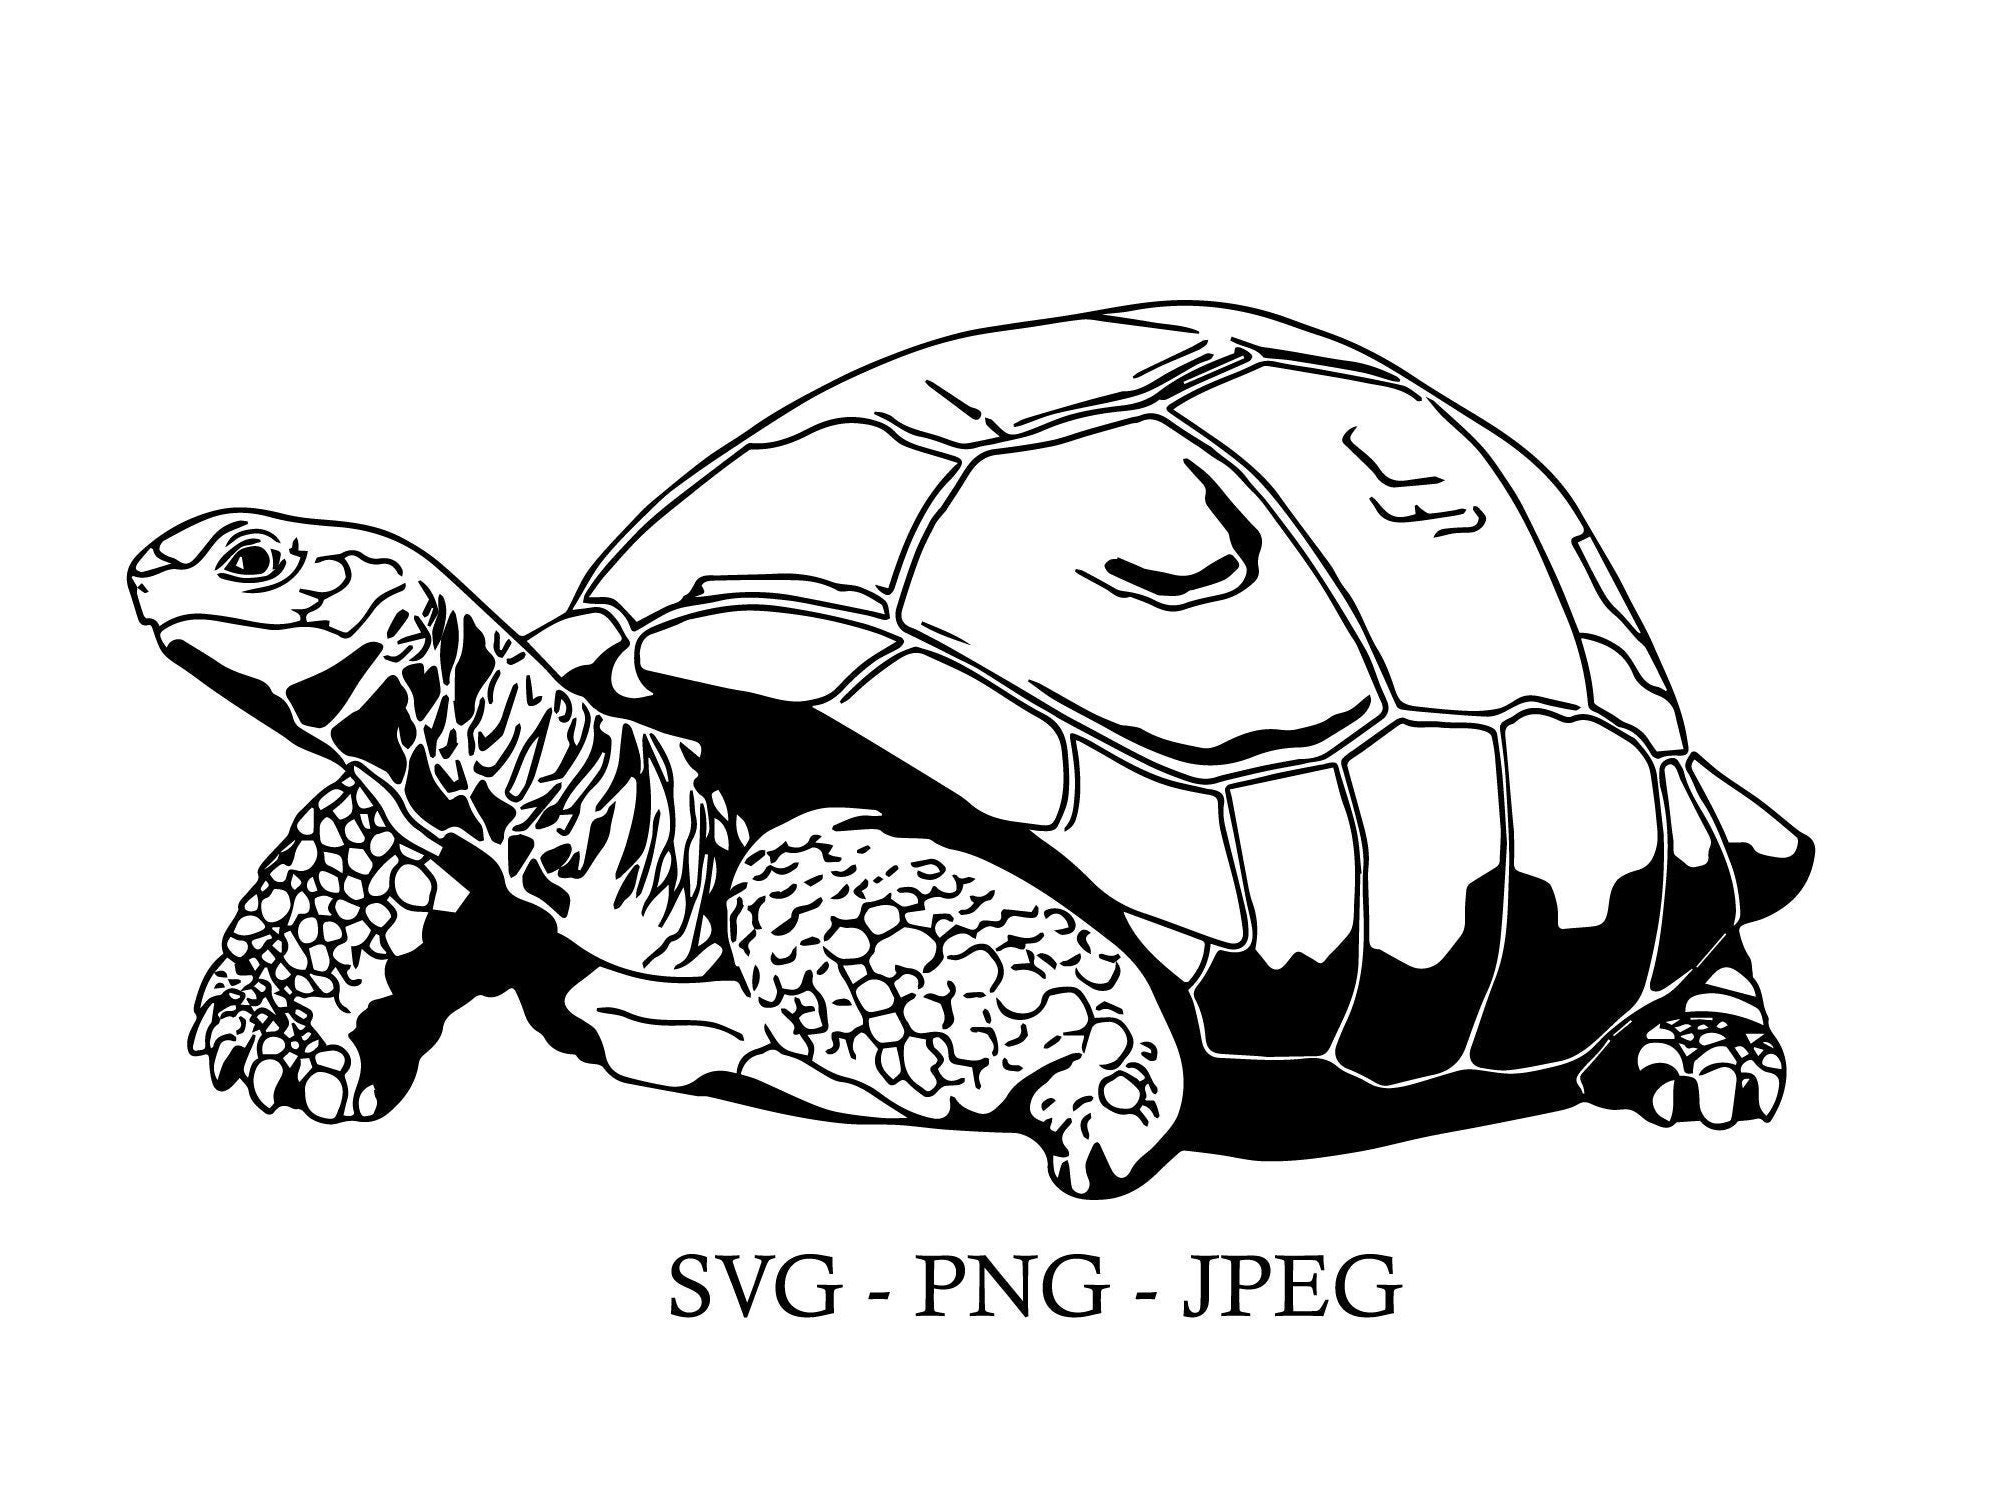 Slow Down Turtle Tortoise and Snail Clipart Instant Digital Download SVG  EPS PNG Pdf Ai Dxf Jpg Cut Files Commercial Use 